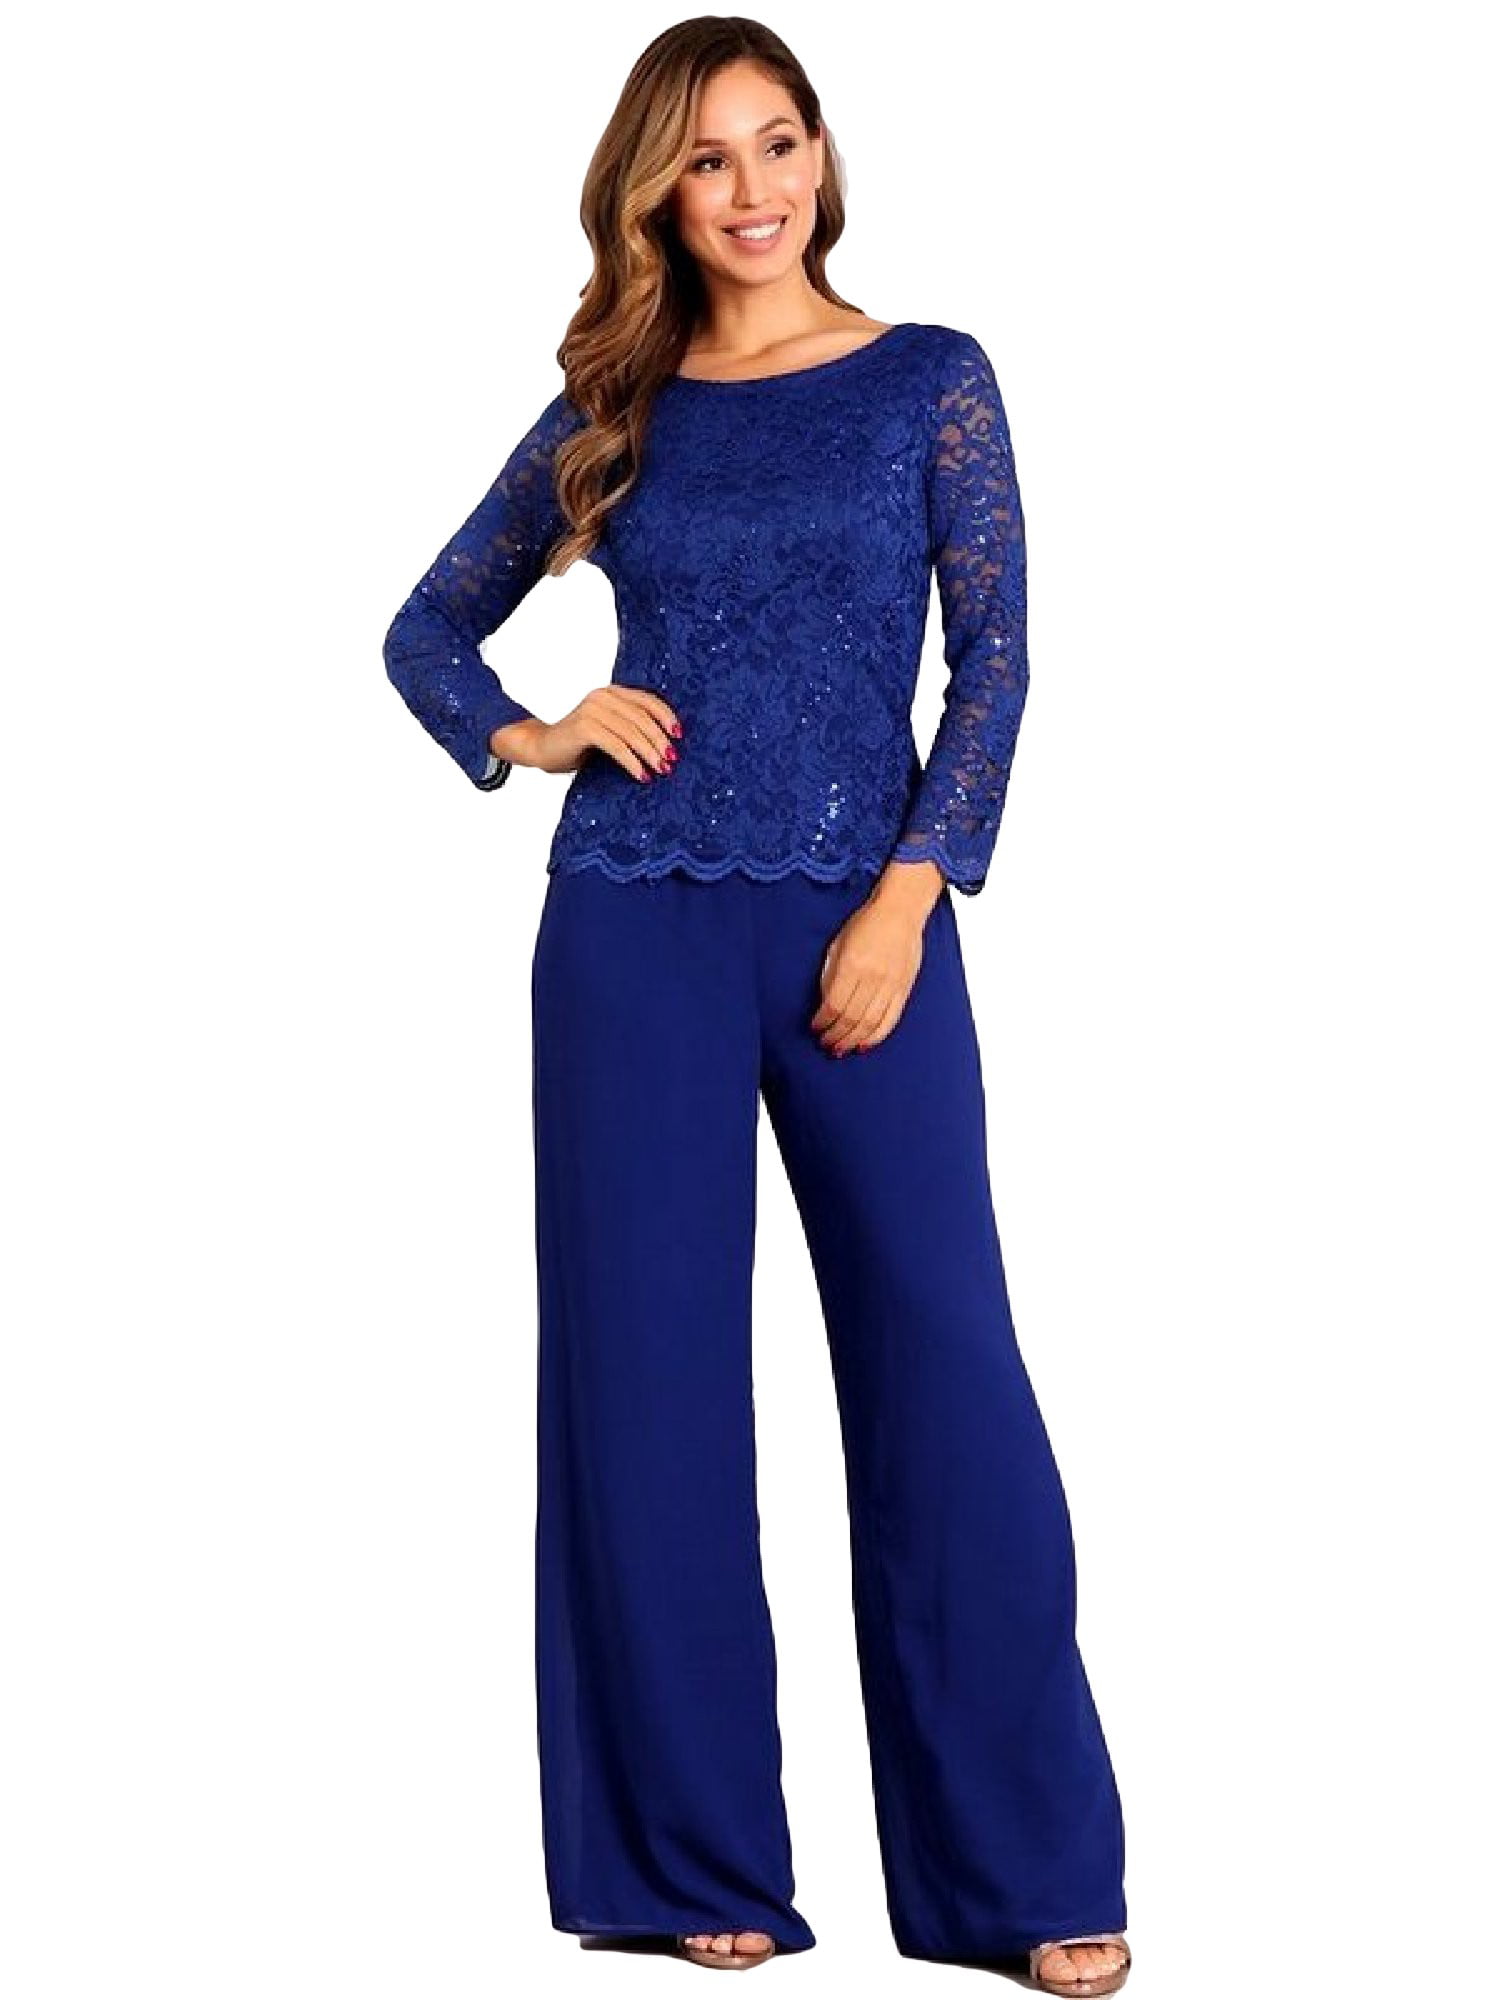 Fanny Fashion Womens Royal Blue Lace Top Full Length Pants Two-Piece ...